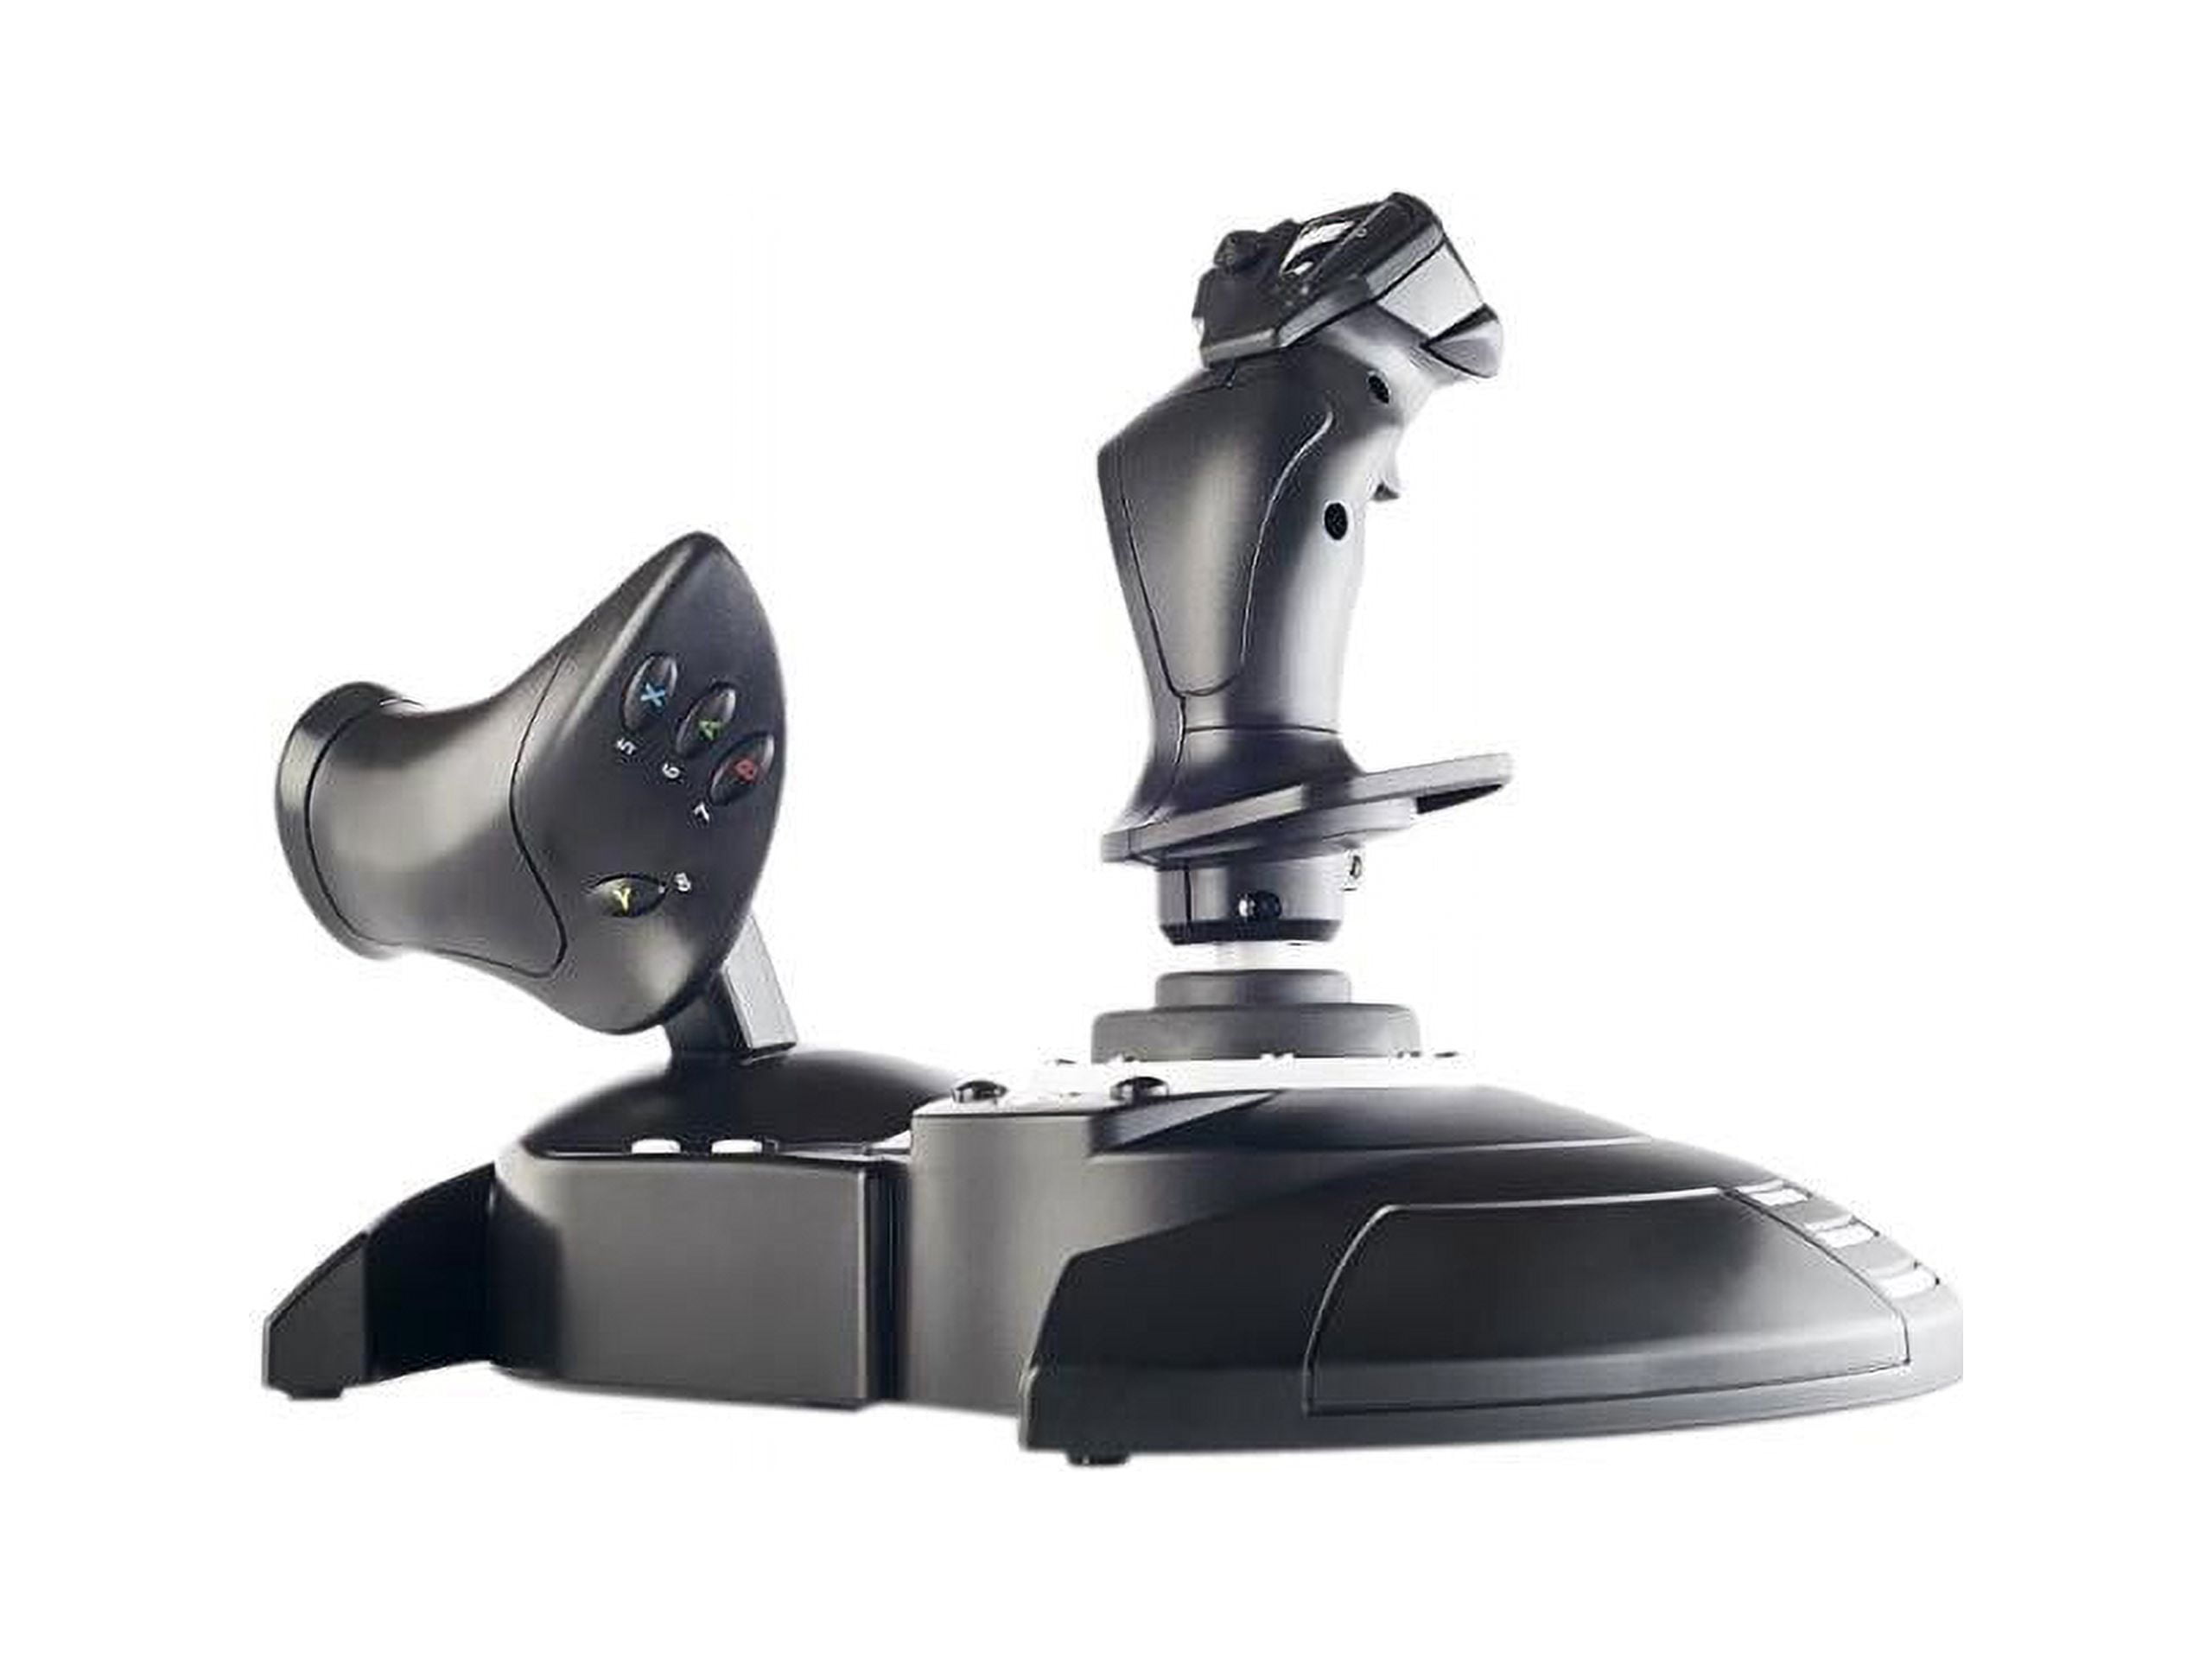 Thrustmaster T-Flight Hotas One Controls for Xbox One, Series X/S, and PC